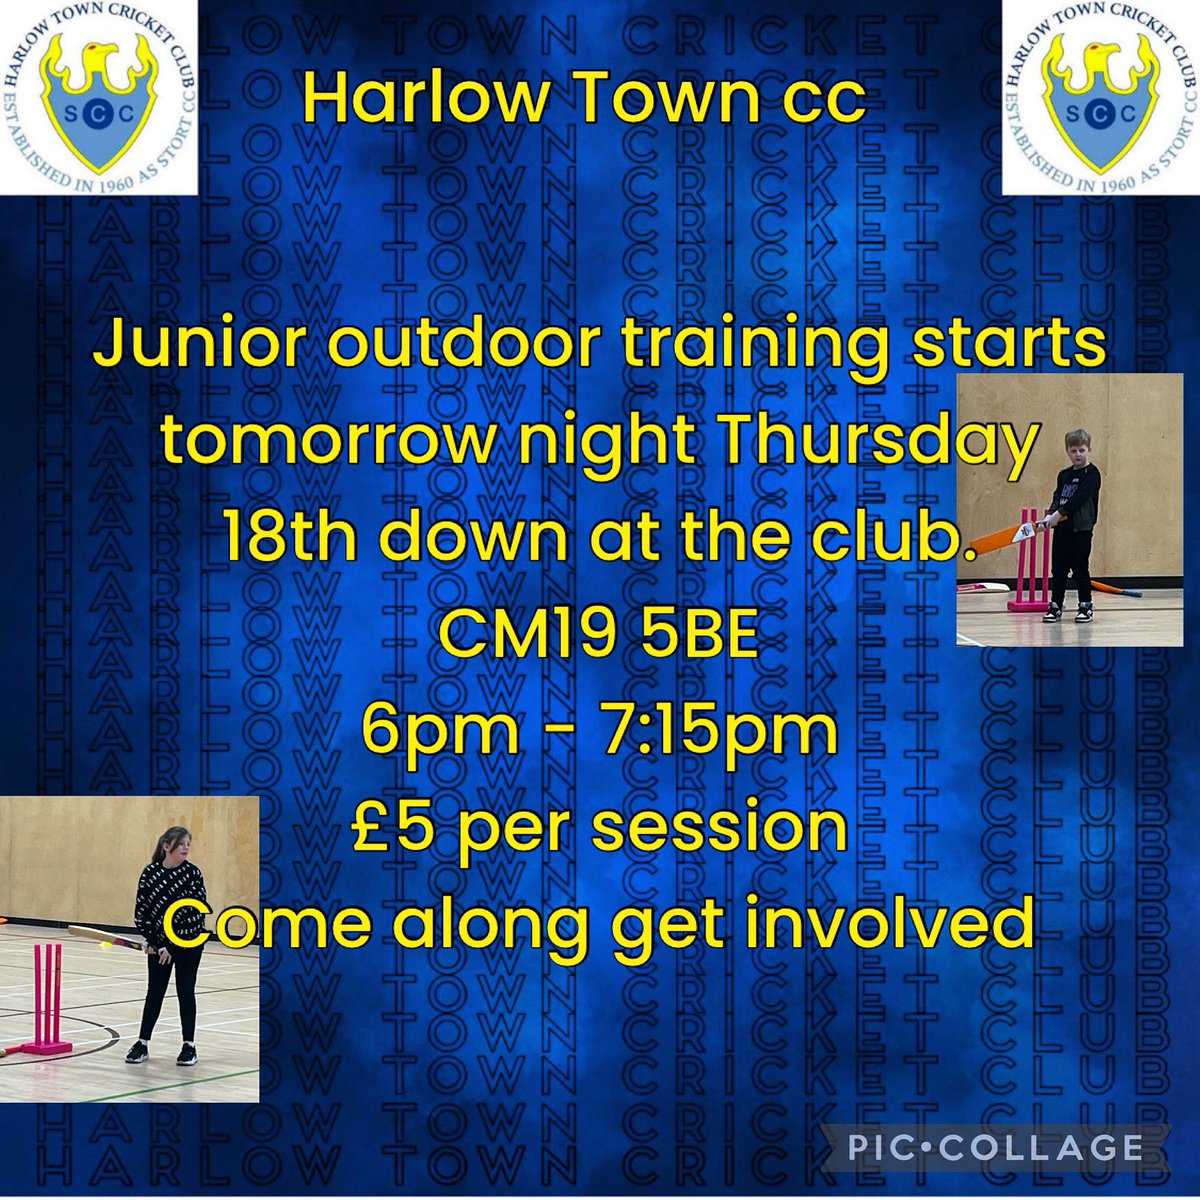 Harlow Town CC (@Harlowtowncc) on Twitter photo 2024-04-17 21:15:46